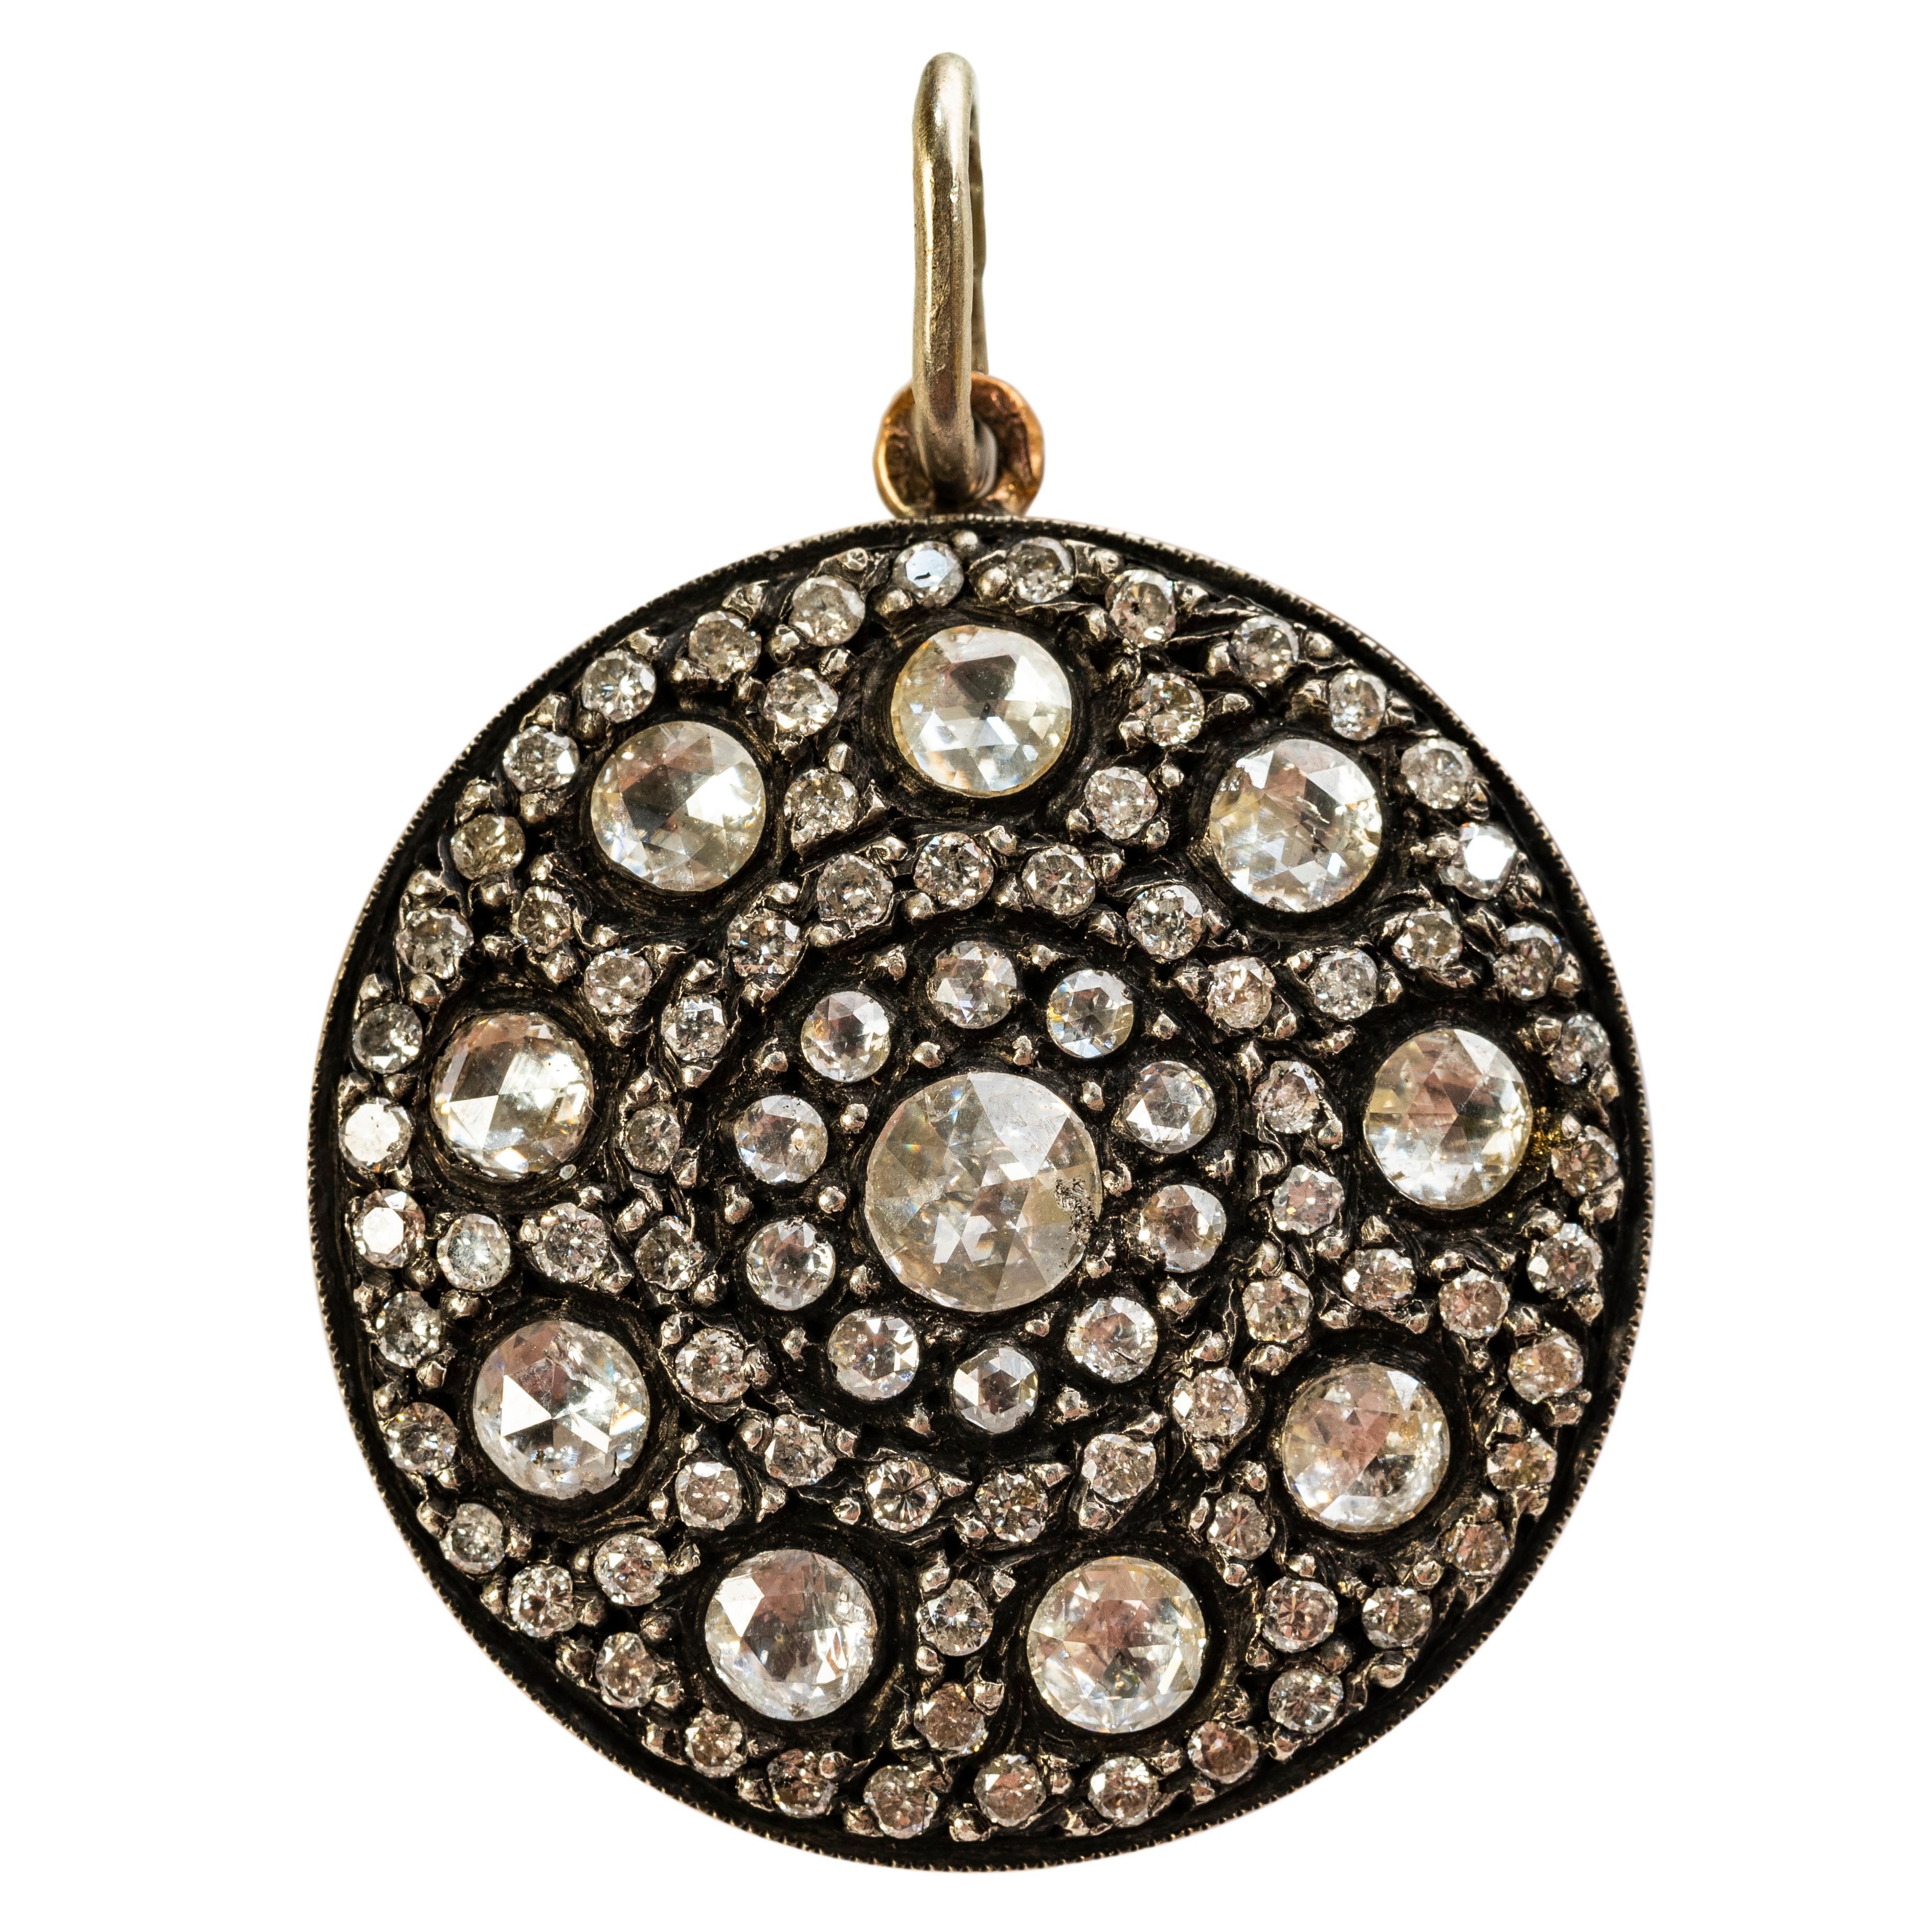 A beautiful diamond encrusted pendant recalling Ancient Muscovy densely set with co-centric bands of rose diamonds, mounted in silver and 9k rose gold, the reverse depicting stylized floral repoussé motifs. 

With French control marks. Chain not